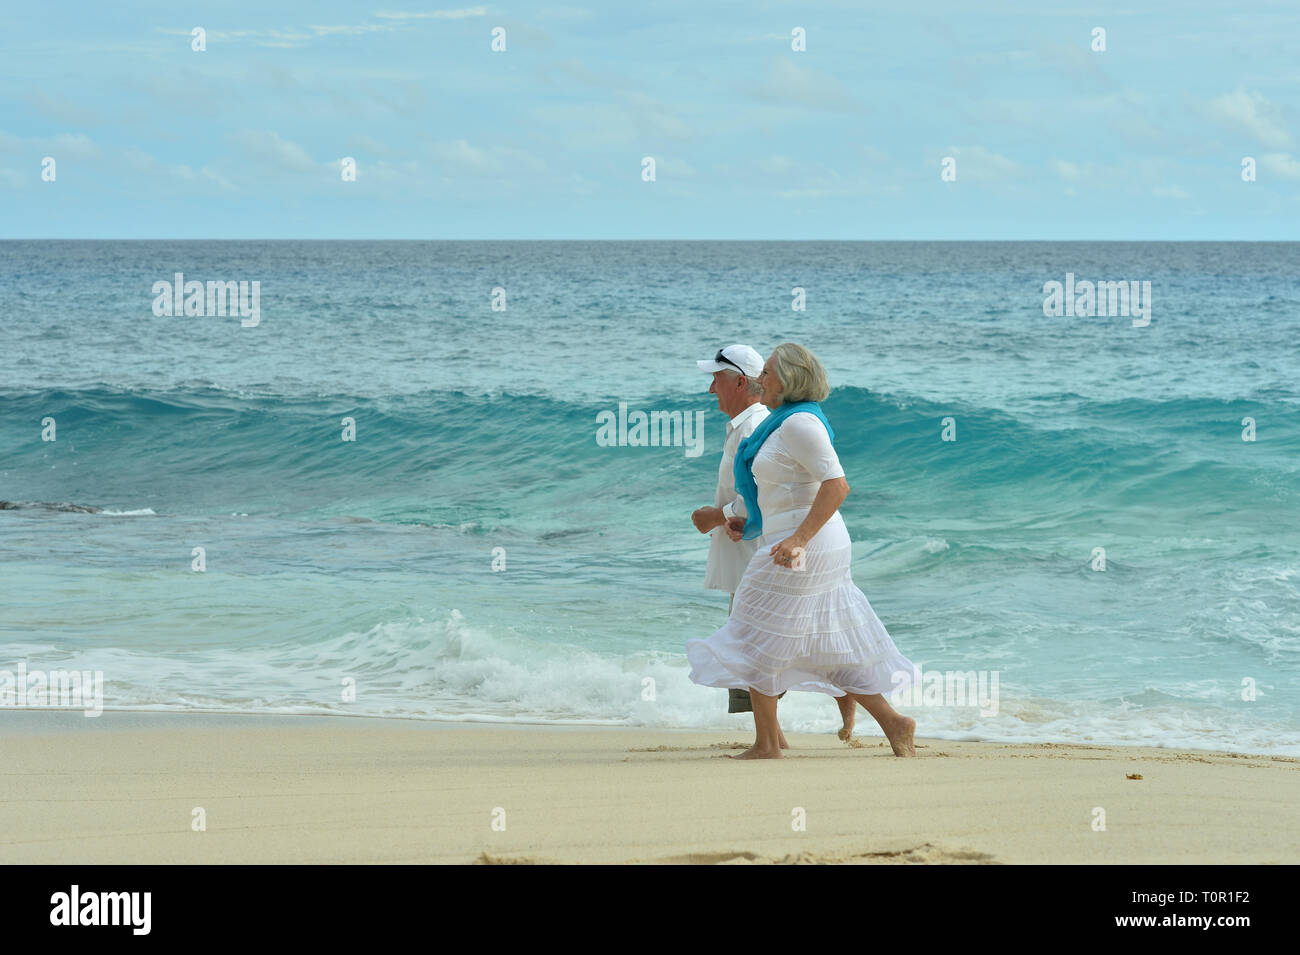 Portrait of happy young woman running on tropical beach Banque D'Images